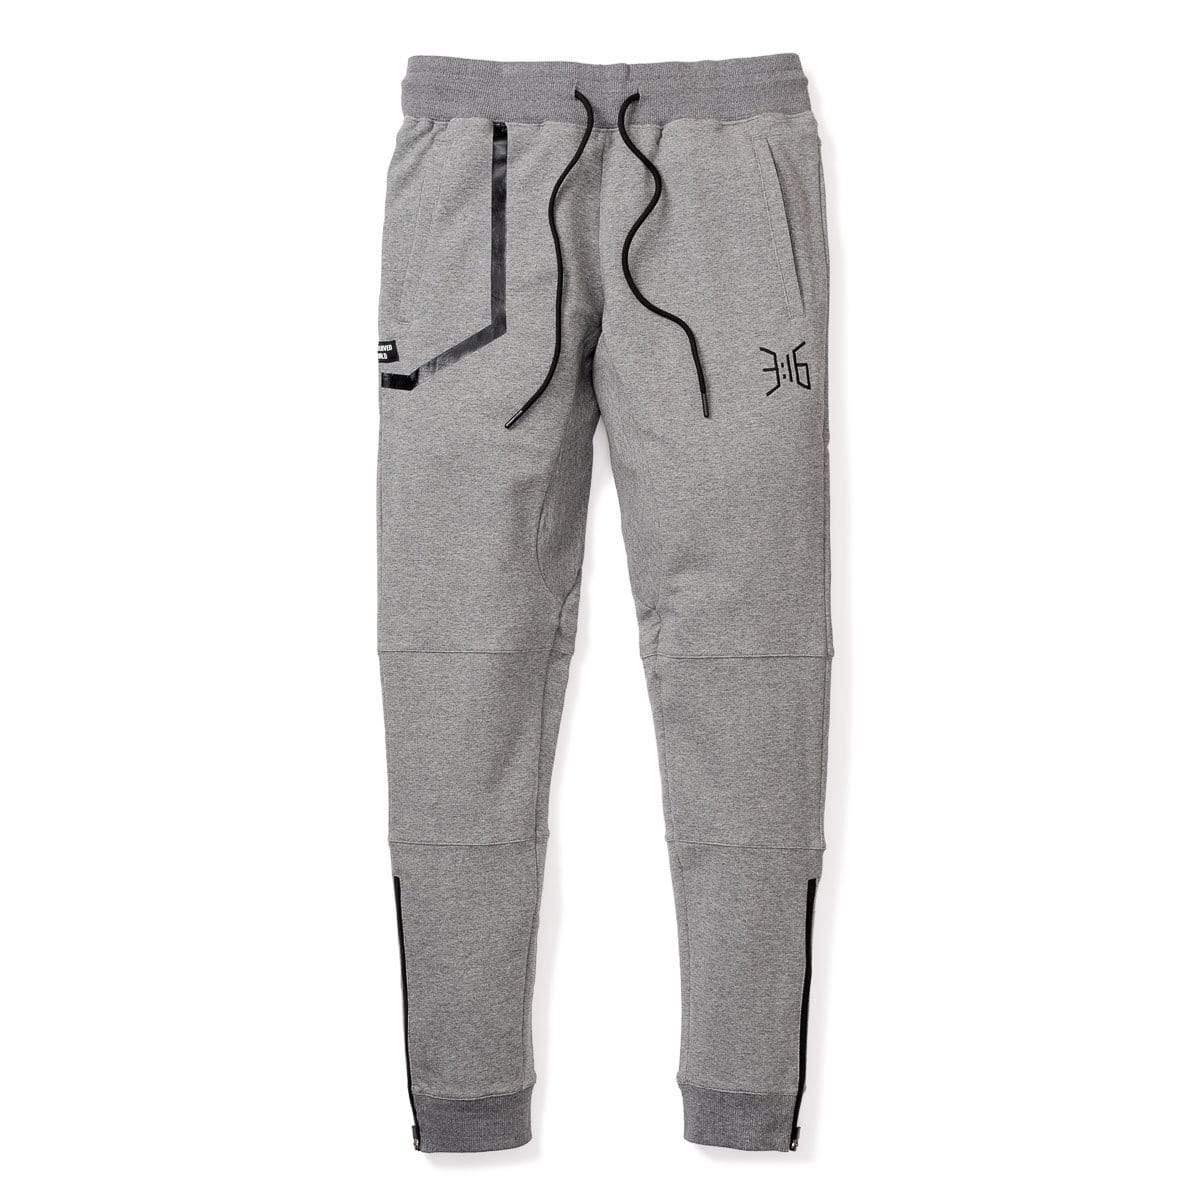 3:16 Collection Joggers 3:16 - Genesis Jogger Pant - GRAY